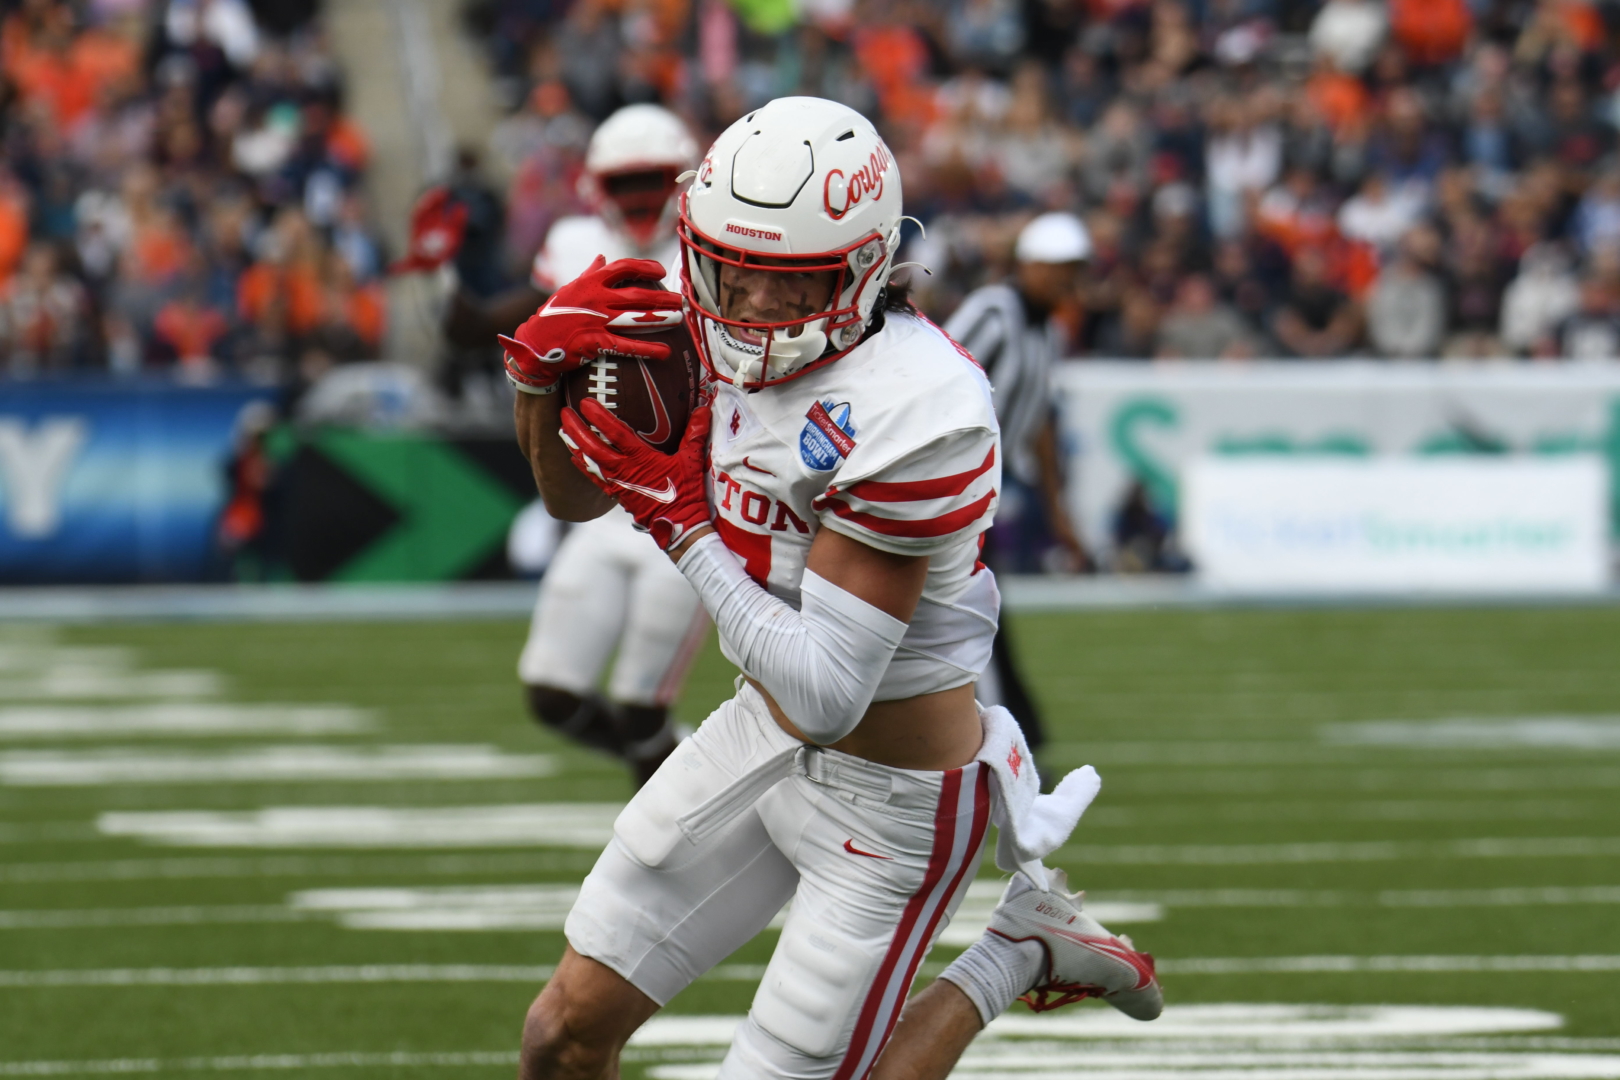 Jake Herslow hauls in a 26-yard touchdown from quarterback Clayton Tune late in the fourth quarter of the Birmingham Bowl to lift UH over Auburn. | Steven Paultanis/The Cougar